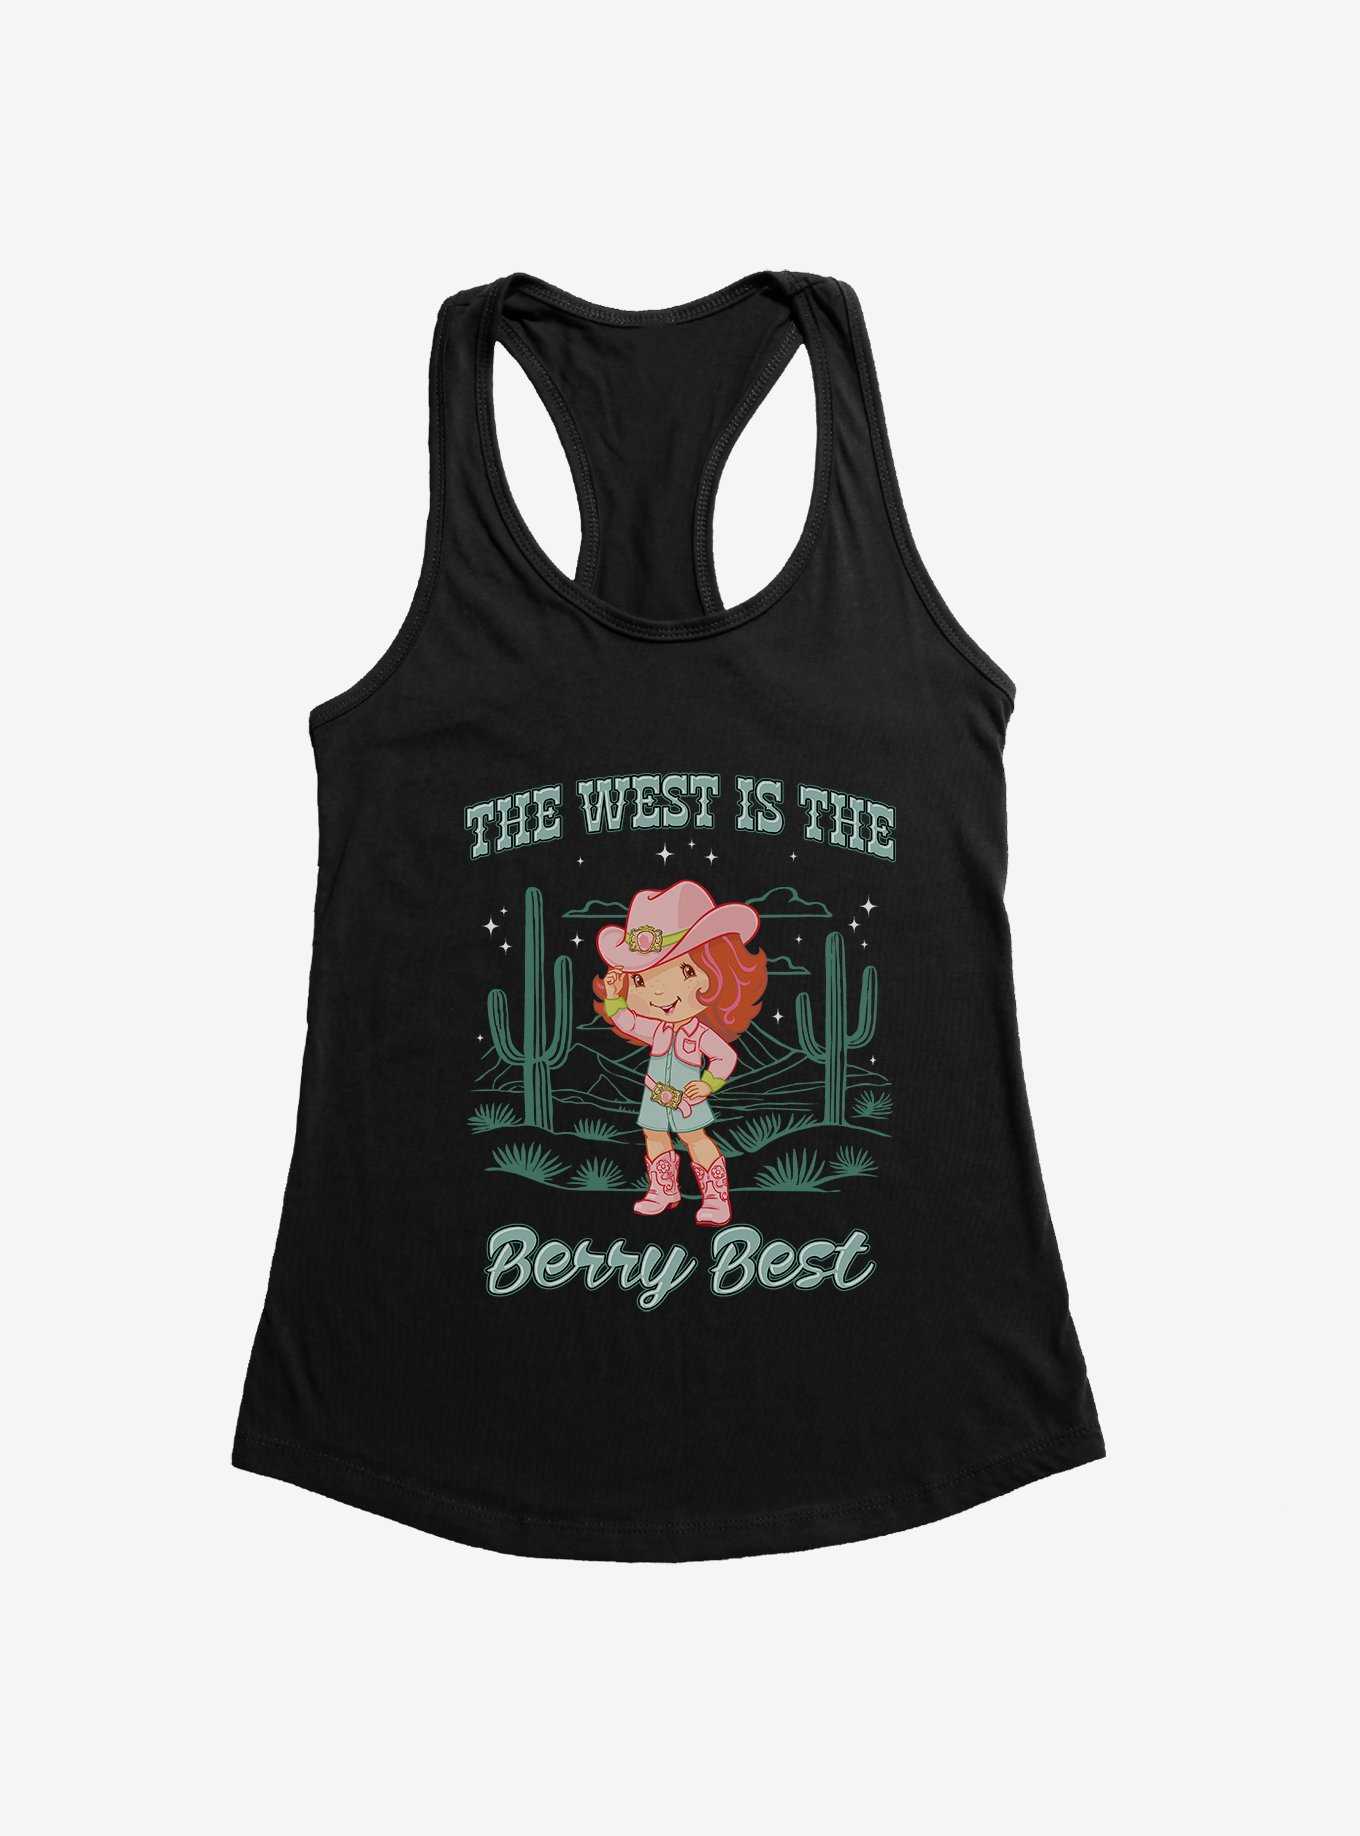 Strawberry Shortcake The West Is The Berry Best Girls Tank, , hi-res